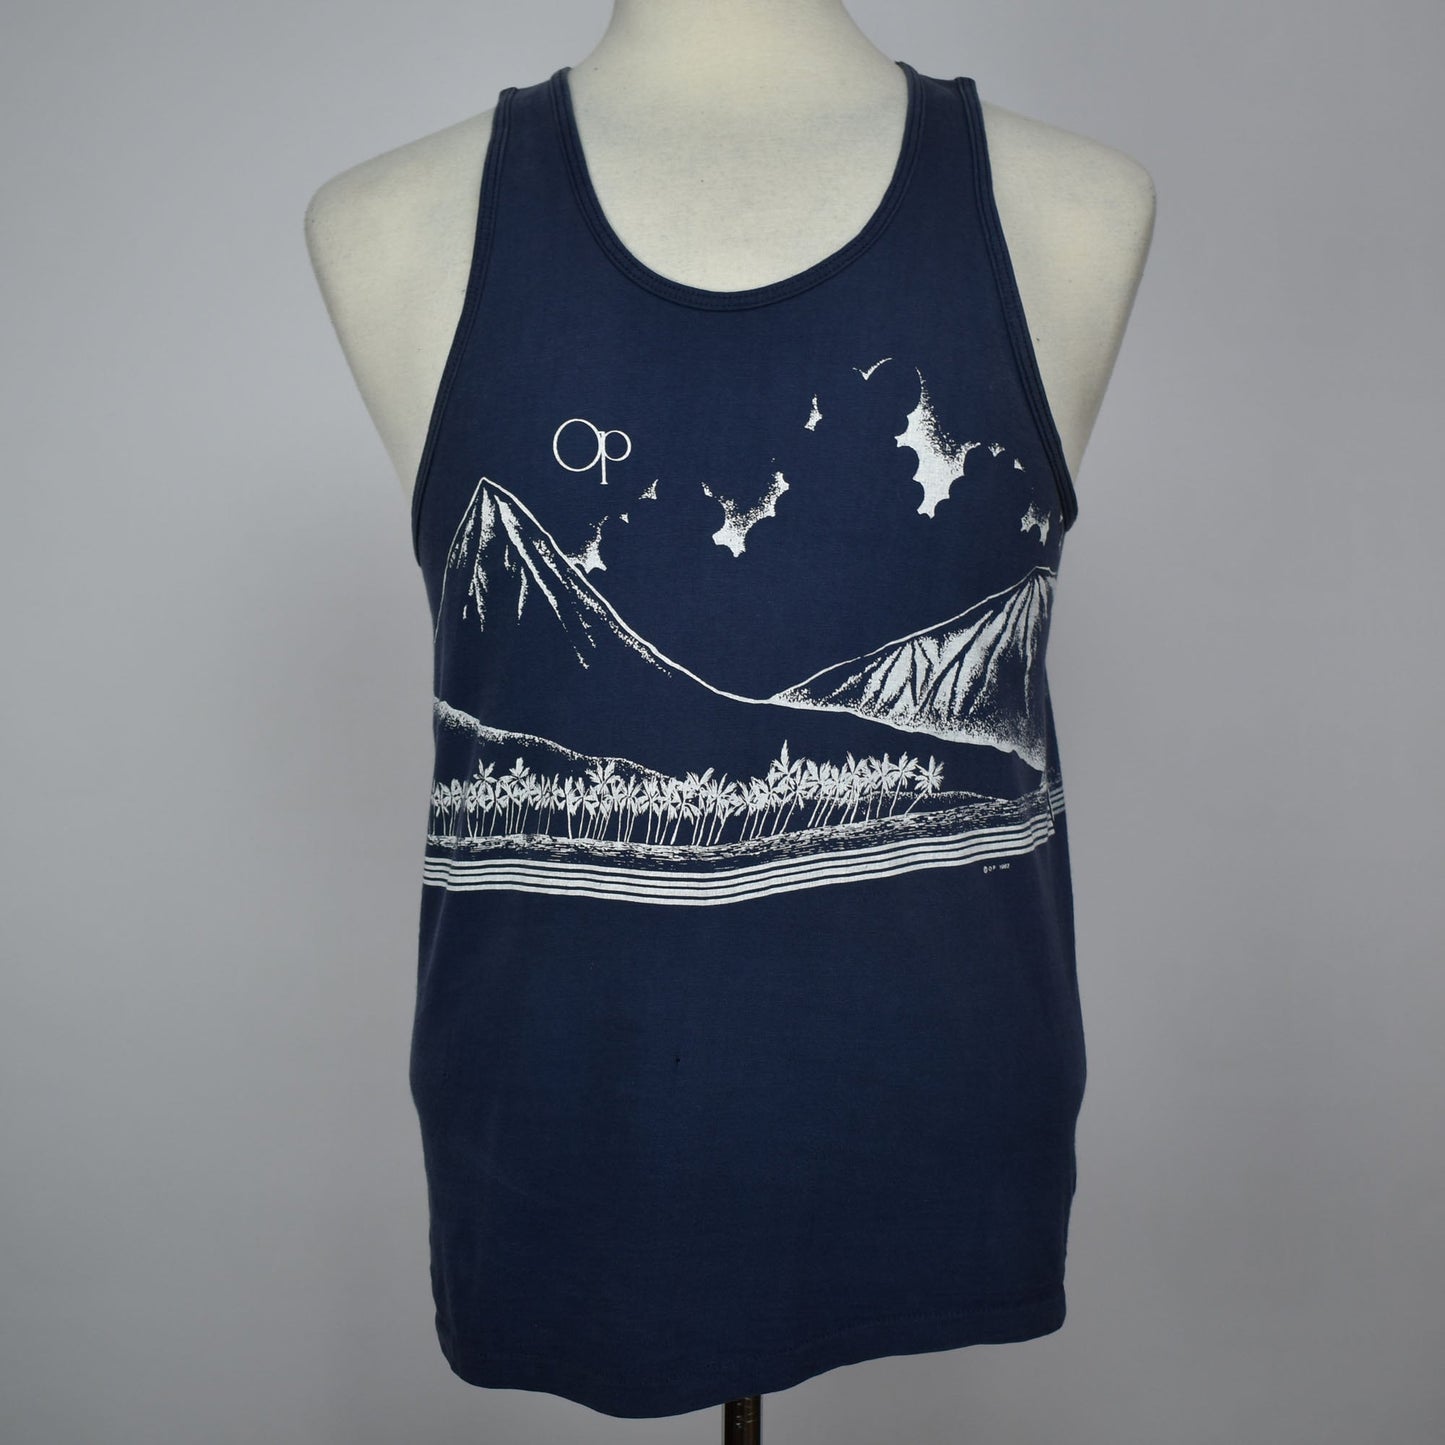 Vintage 80s Ocean Pacific Navy Blue Tank Top - Made in USA - Single Stitch - Size L